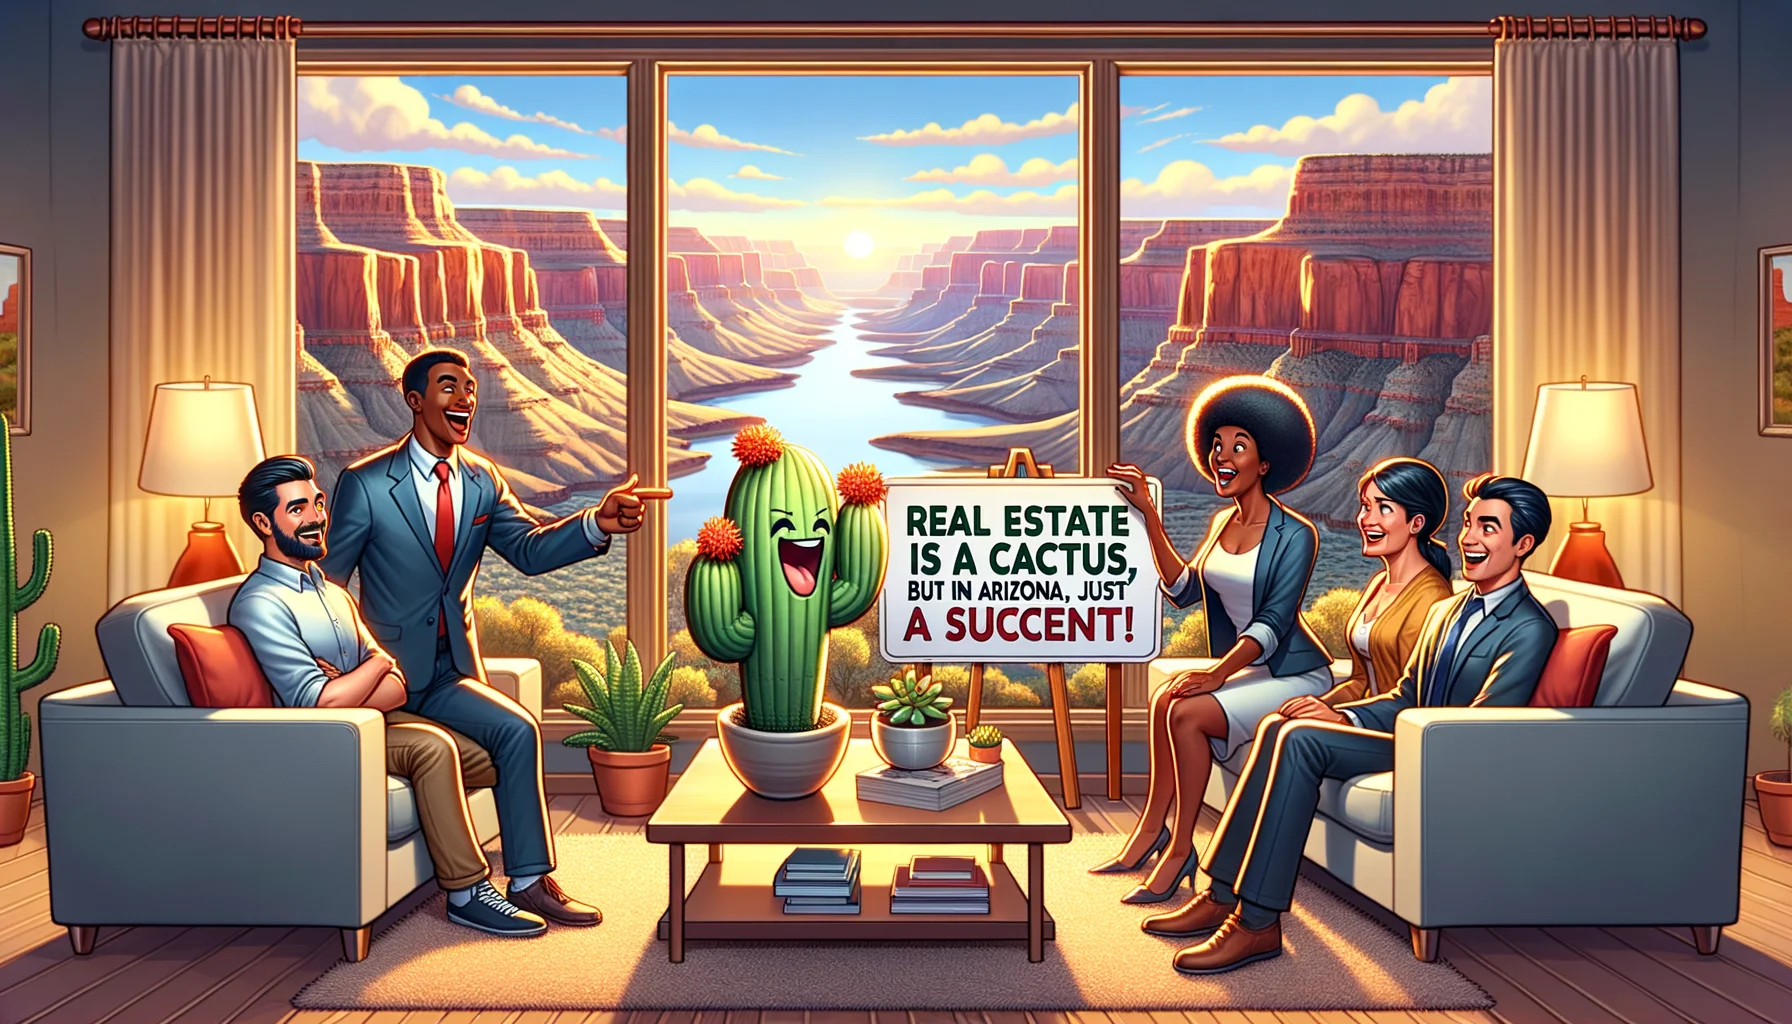 Create a humorous and realistic image celebrating the best aspects of Arizona's real estate market. Picture a spacious sunlit living room with large windows revealing the stunning backdrop of the Grand Canyon. On the right, have a real estate agent, an African American woman, laughing as she points towards a playful sign saying 'Real estate is a cactus, but in Arizona, it’s just a succulent!'. On the left, have a Middle Eastern man and a Hispanic woman, potential buyers, looking amazed and excited at the scene unfolding before them.